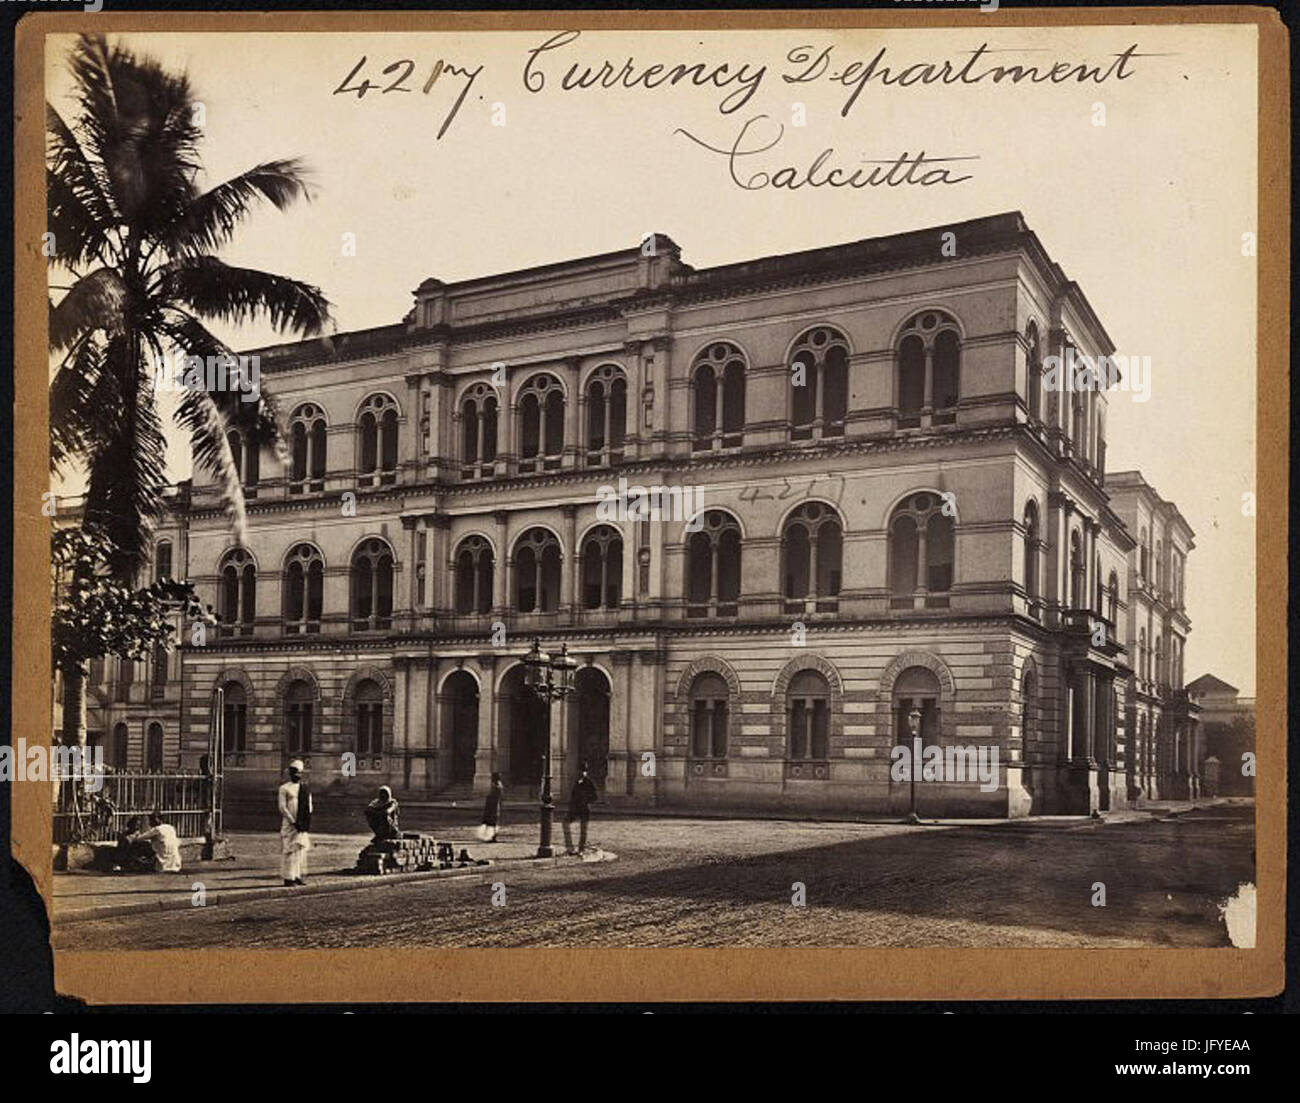 Currency Department Calcutta by Francis Frith Stock Photo